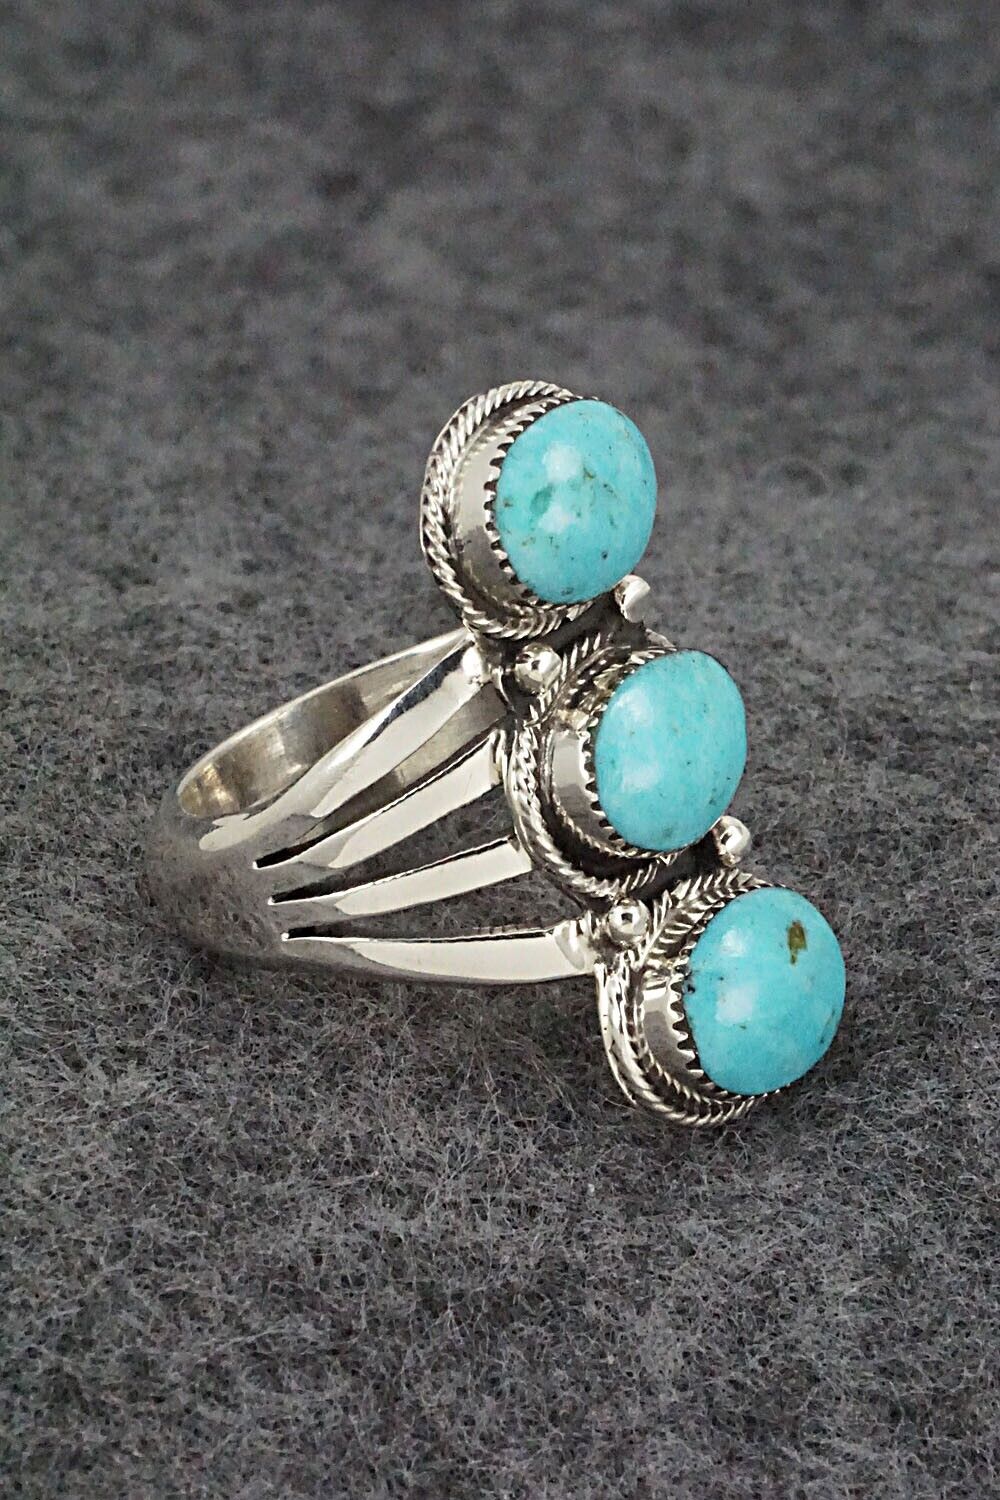 Turquoise & Sterling Silver Ring - Sheena Jack - Size 8